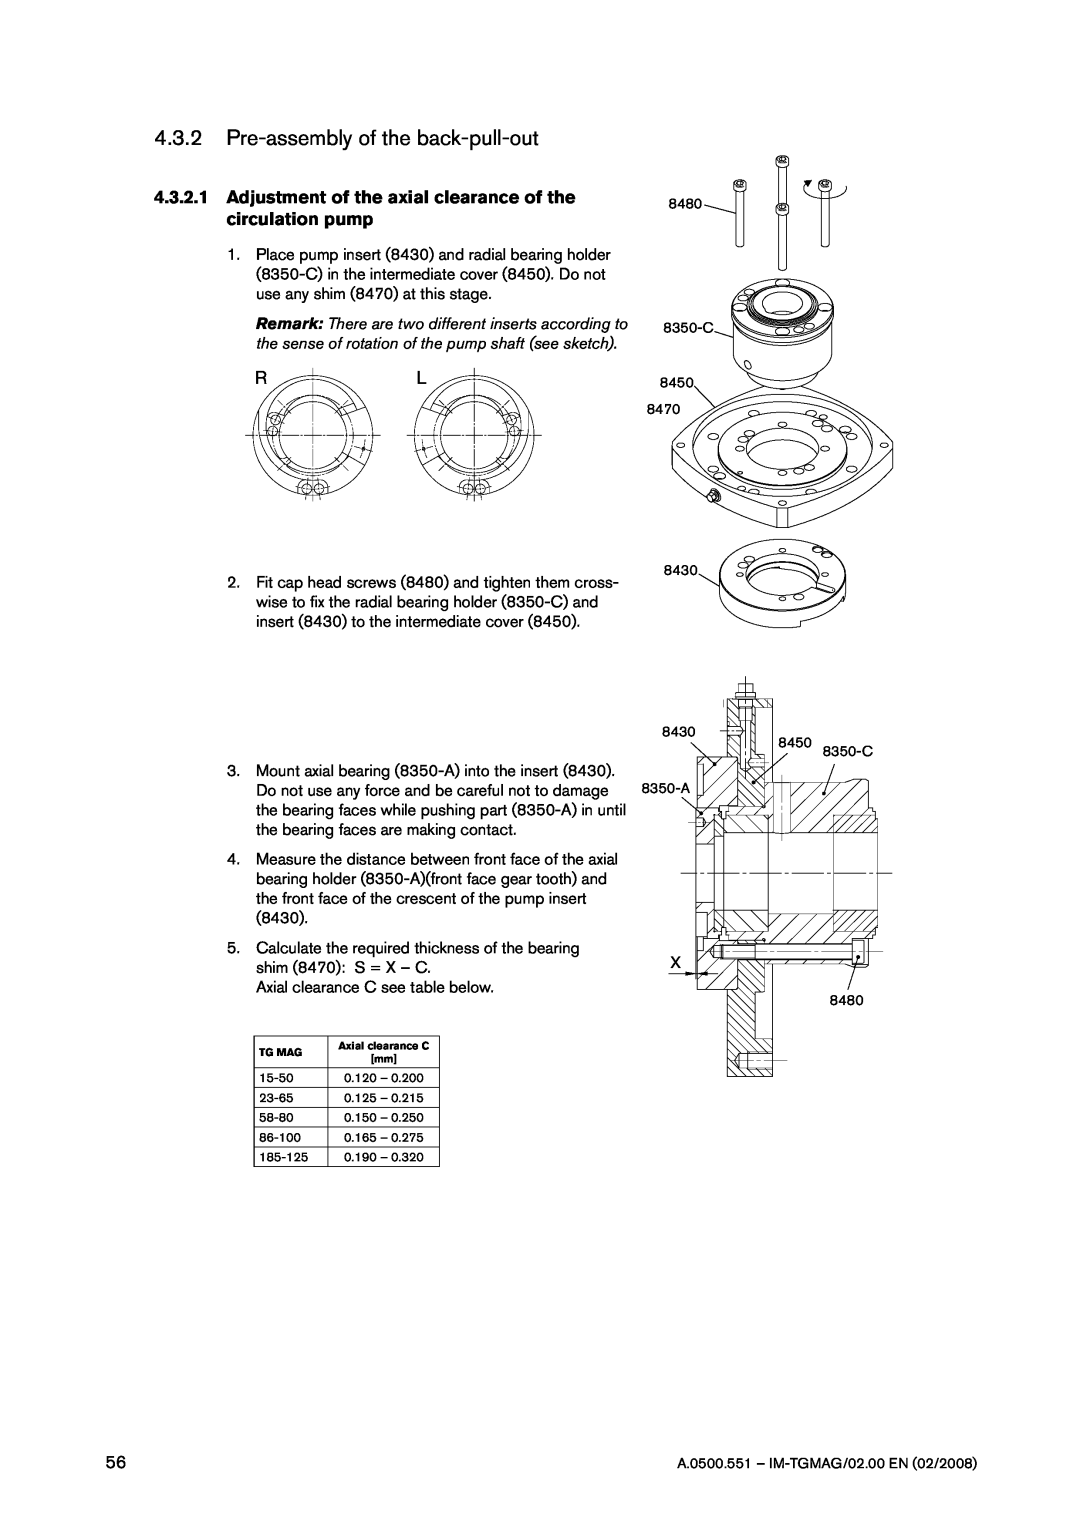 SPX Cooling Technologies TG MAG15-50 4.3.2Pre-assemblyof the back-pull-out, Adjustment of the axial clearance of the 